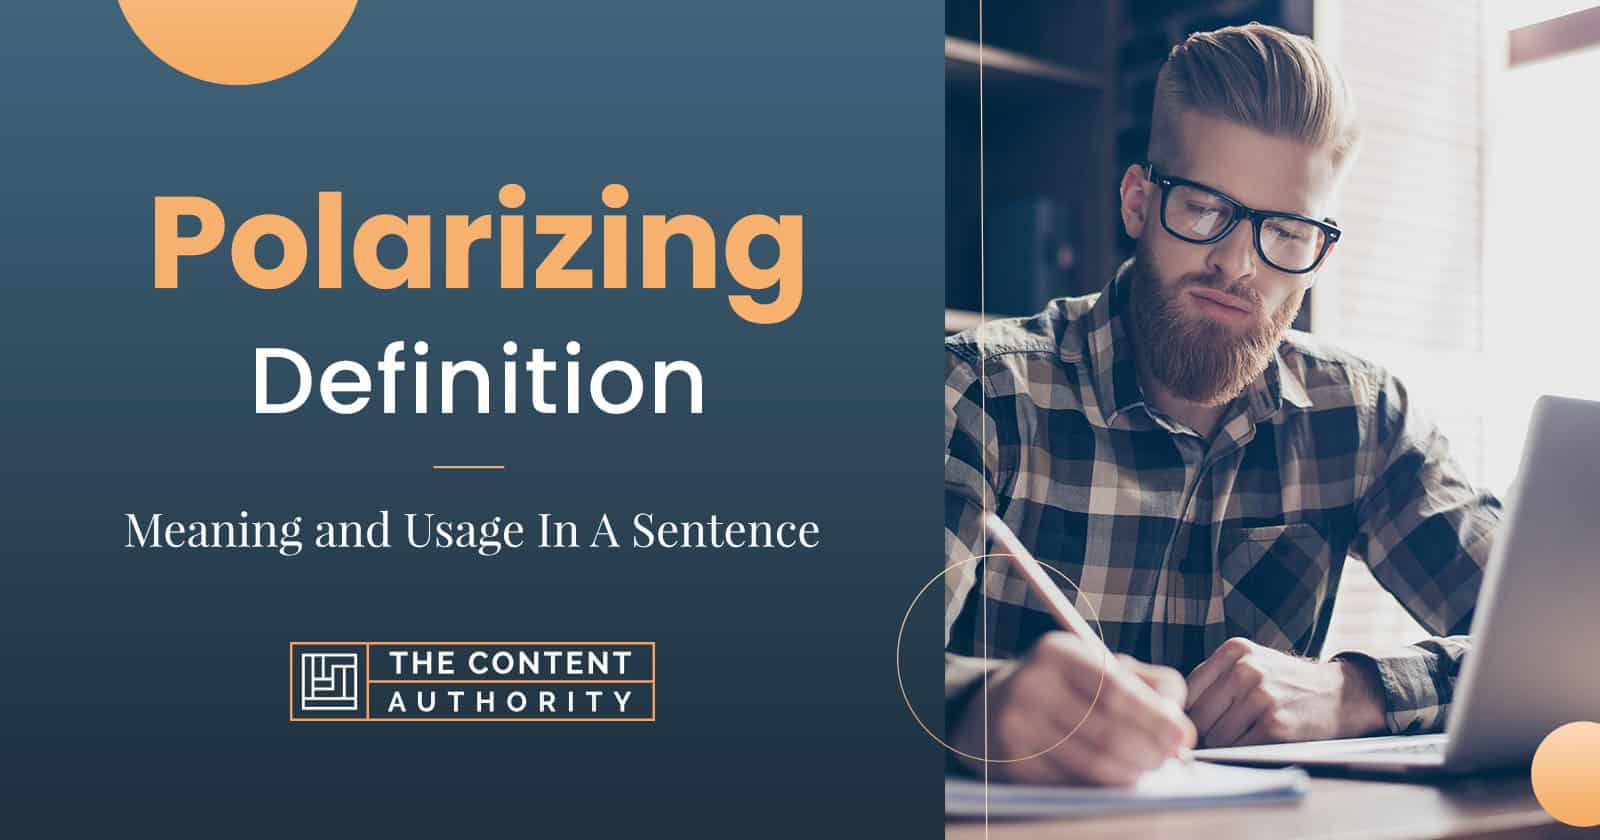 Polarizing Definition &#8211; Meaning and Usage In A Sentence